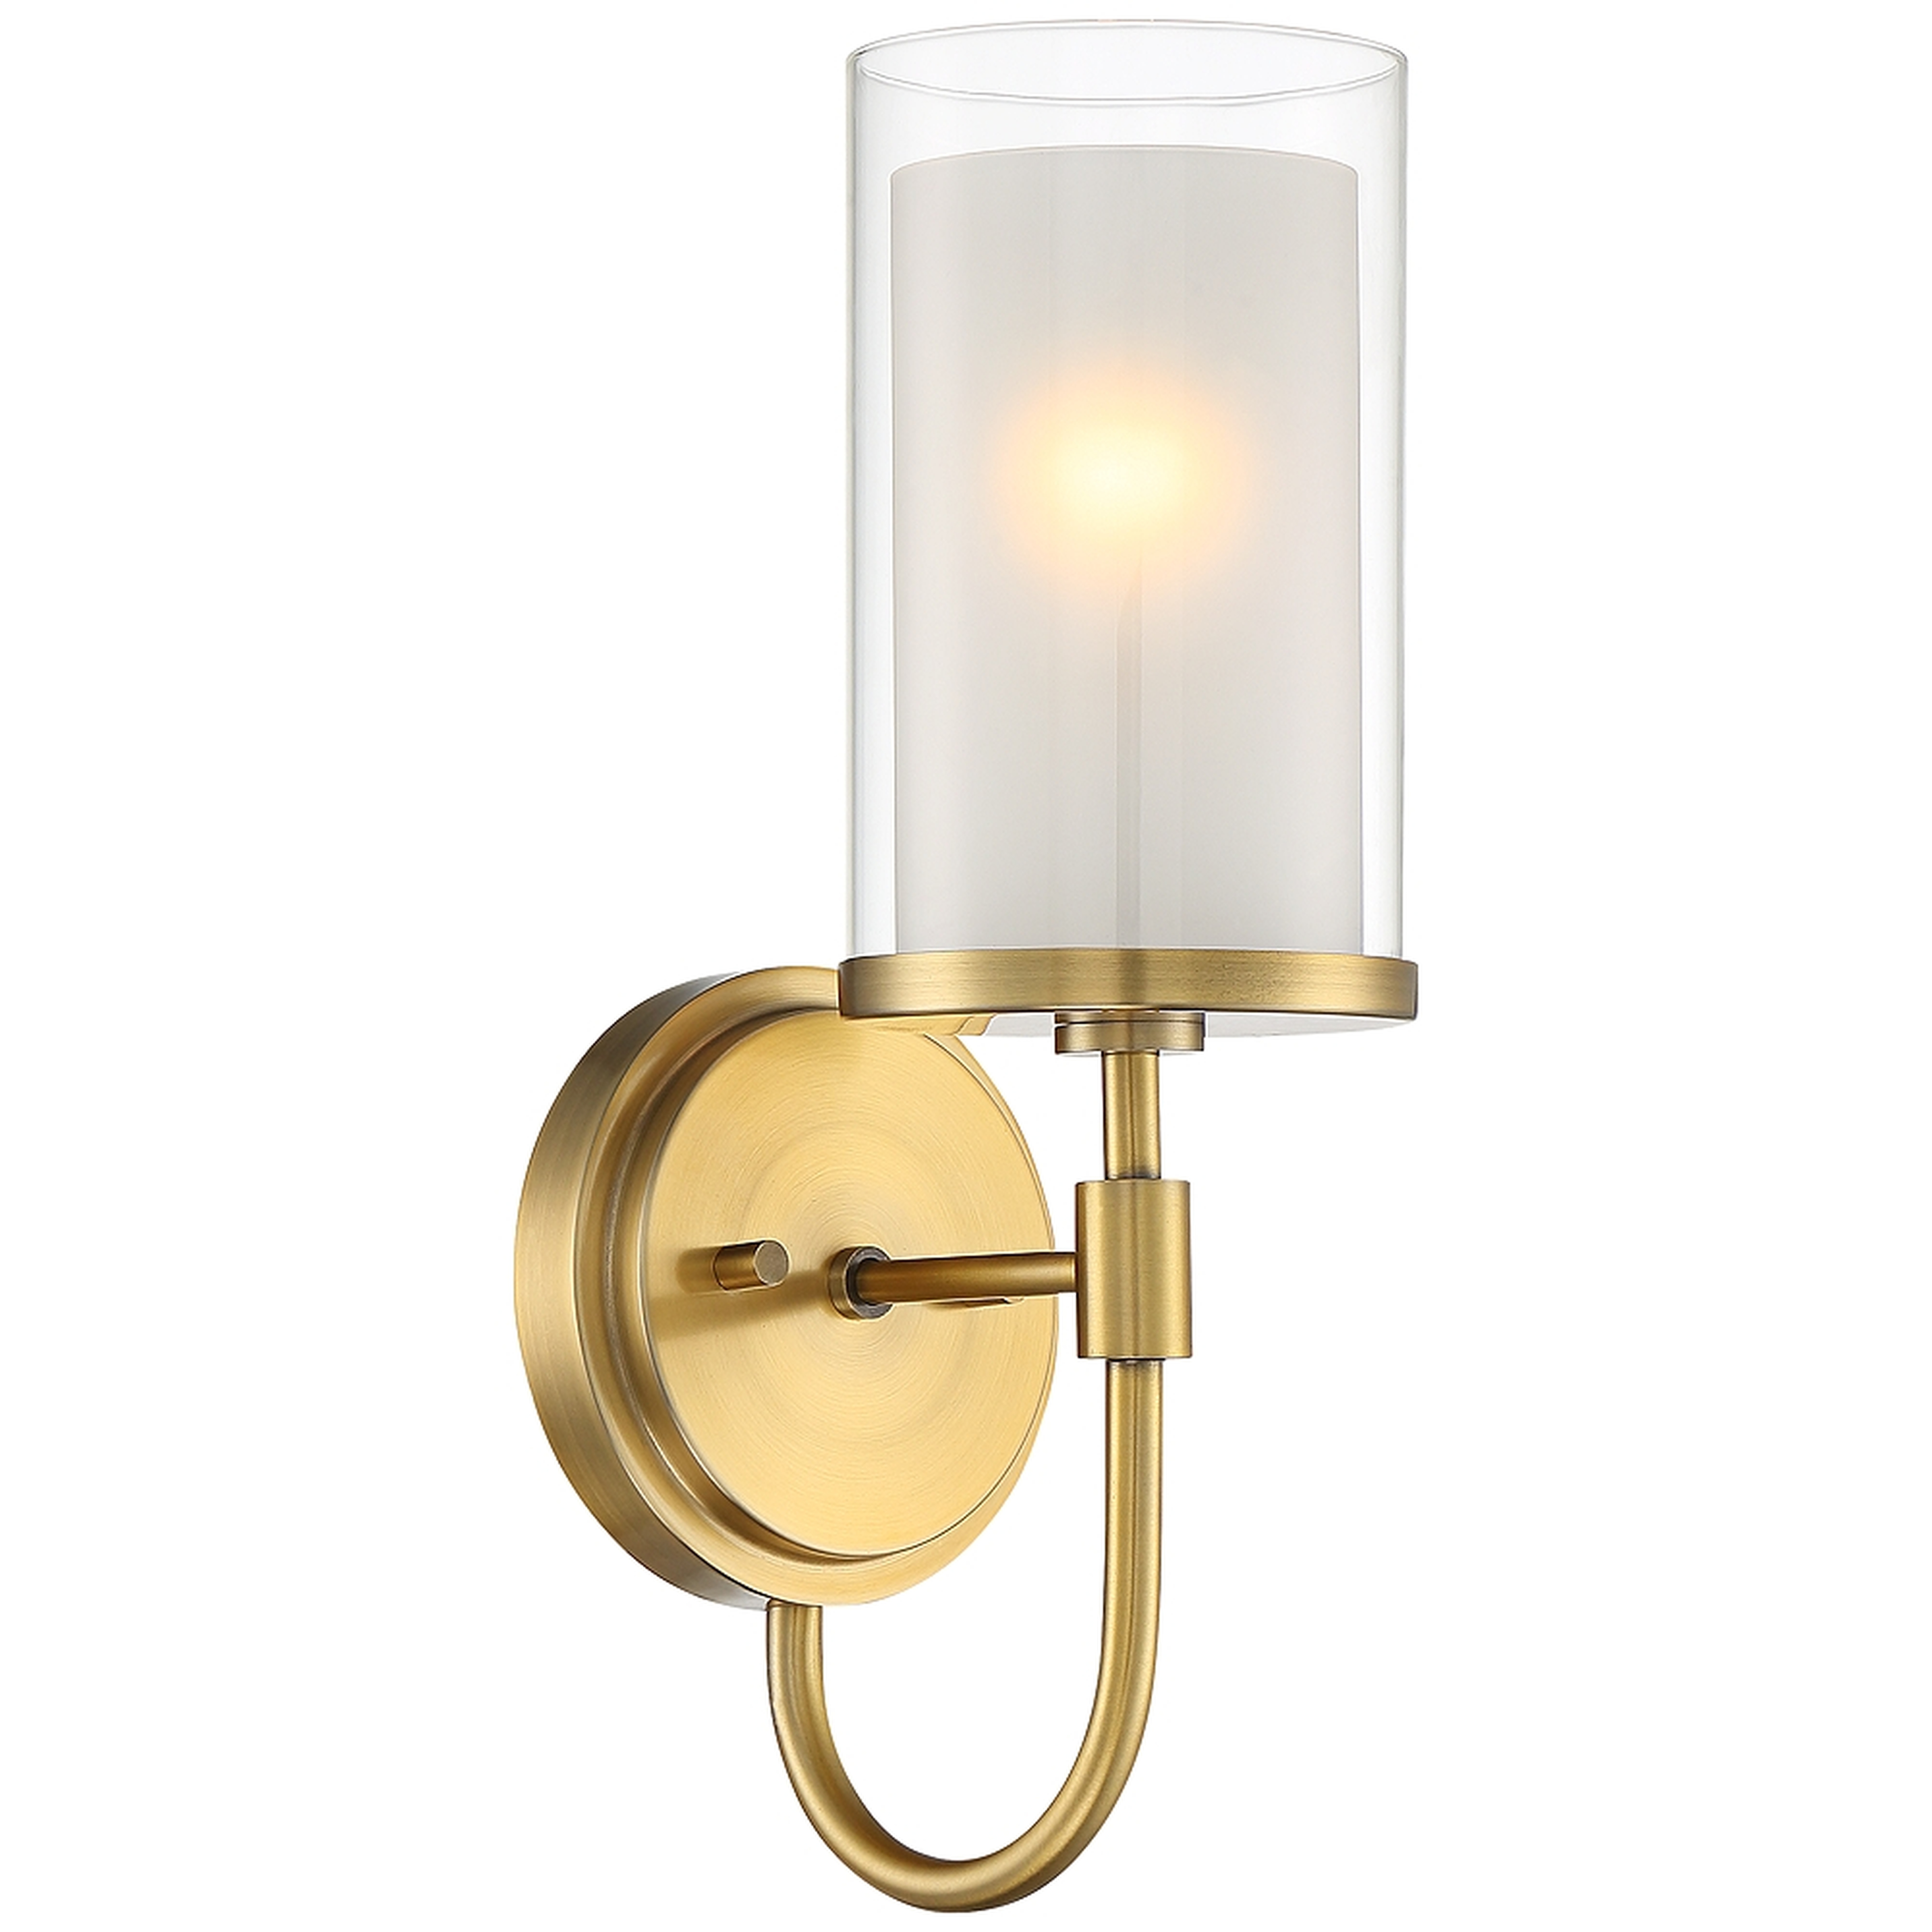 Lesley 15" High Double Glass Antique Brass Wall Sconce - Style # 68E06 - Lamps Plus